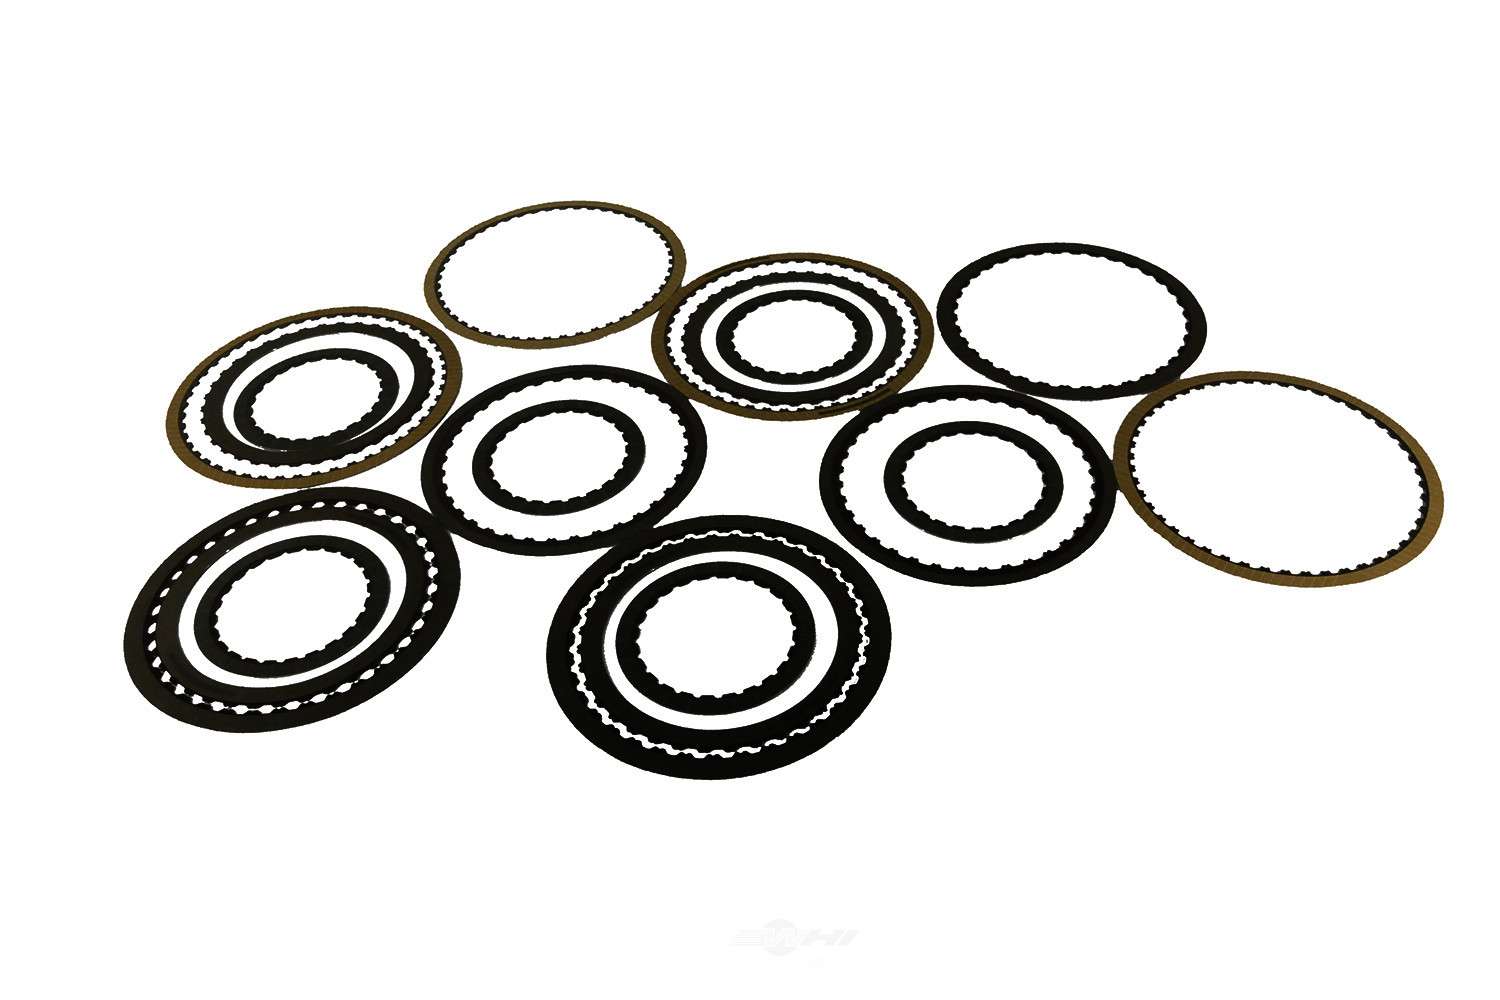 GM GENUINE PARTS - Transmission Clutch Friction Plate Kit - GMP 24264341